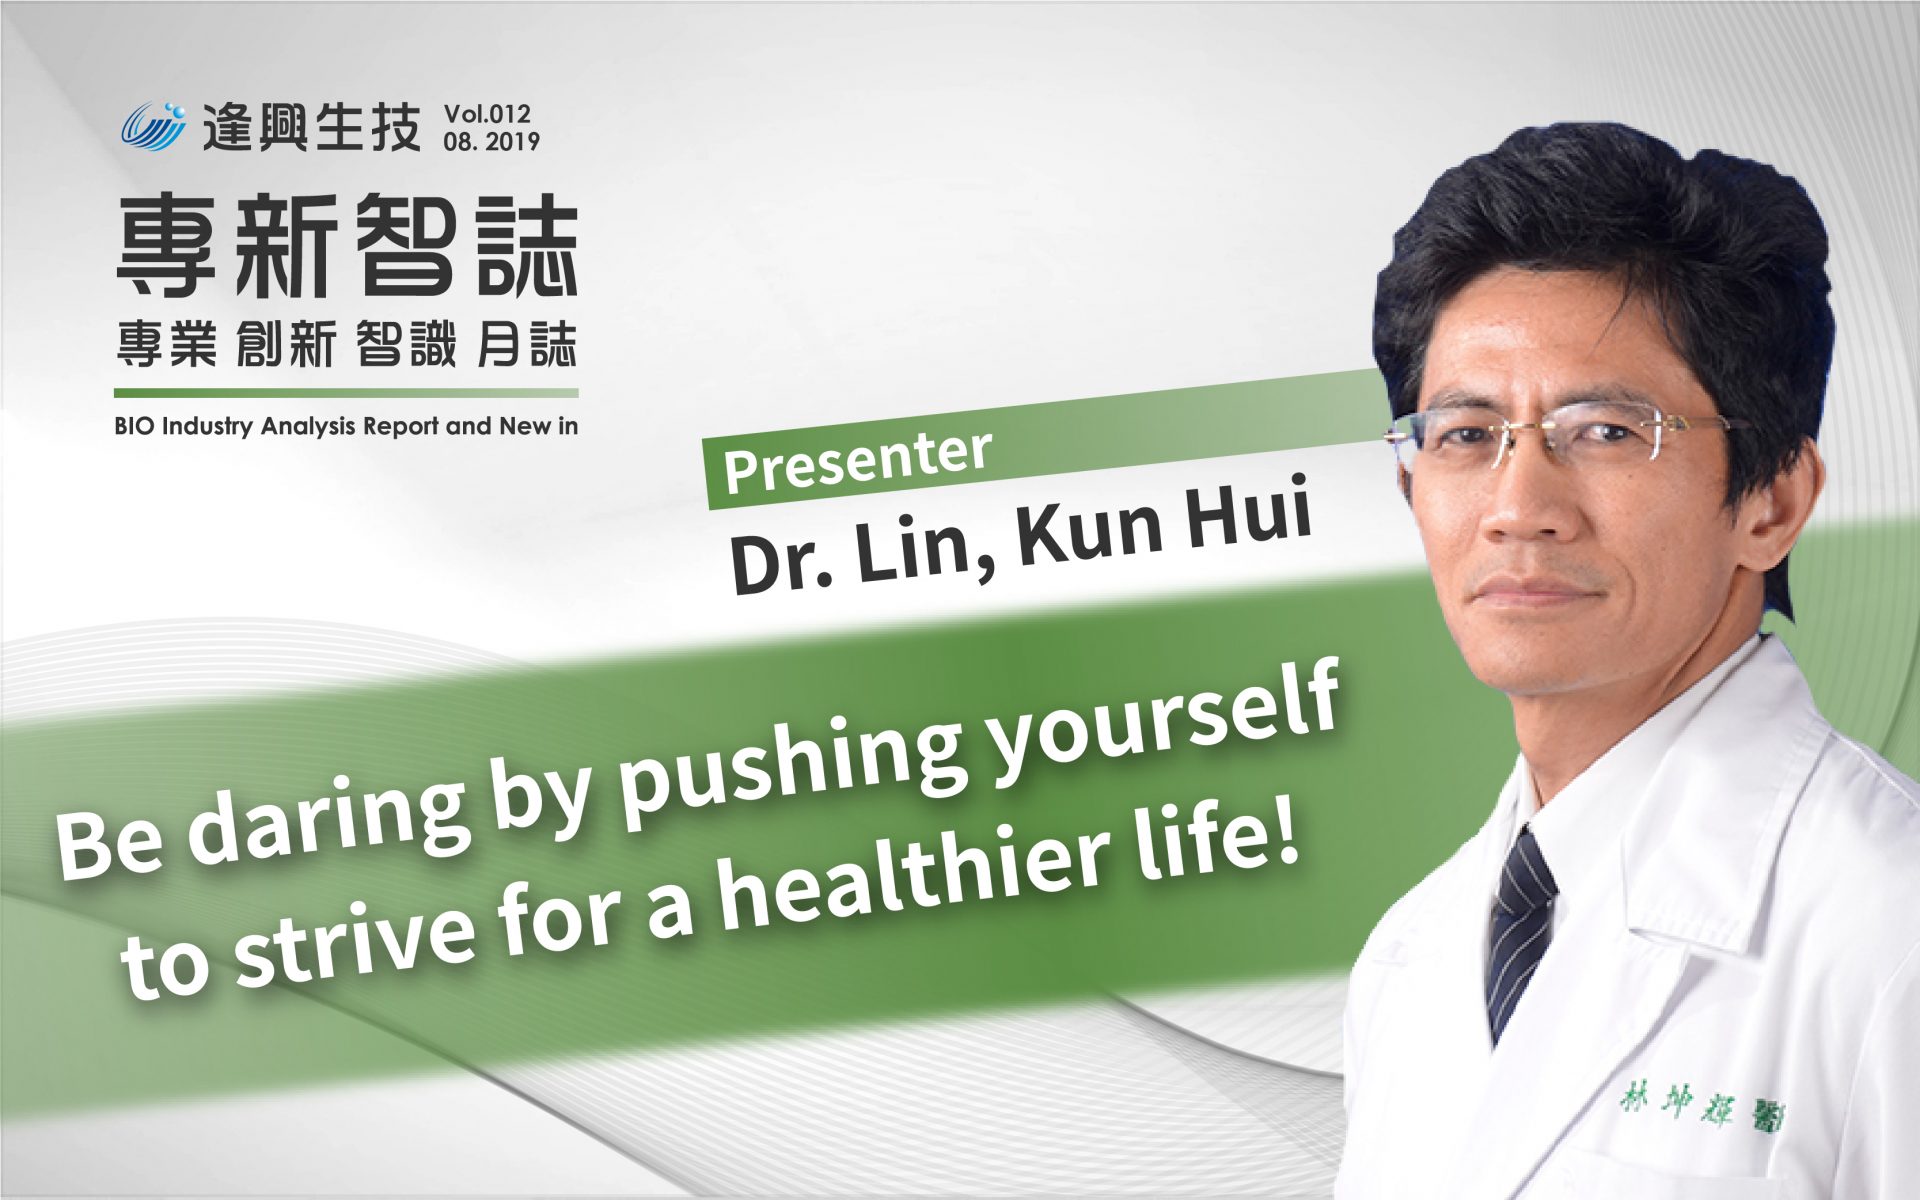 Vol12：Be daring by pushing yourself to strive for a healthier life!